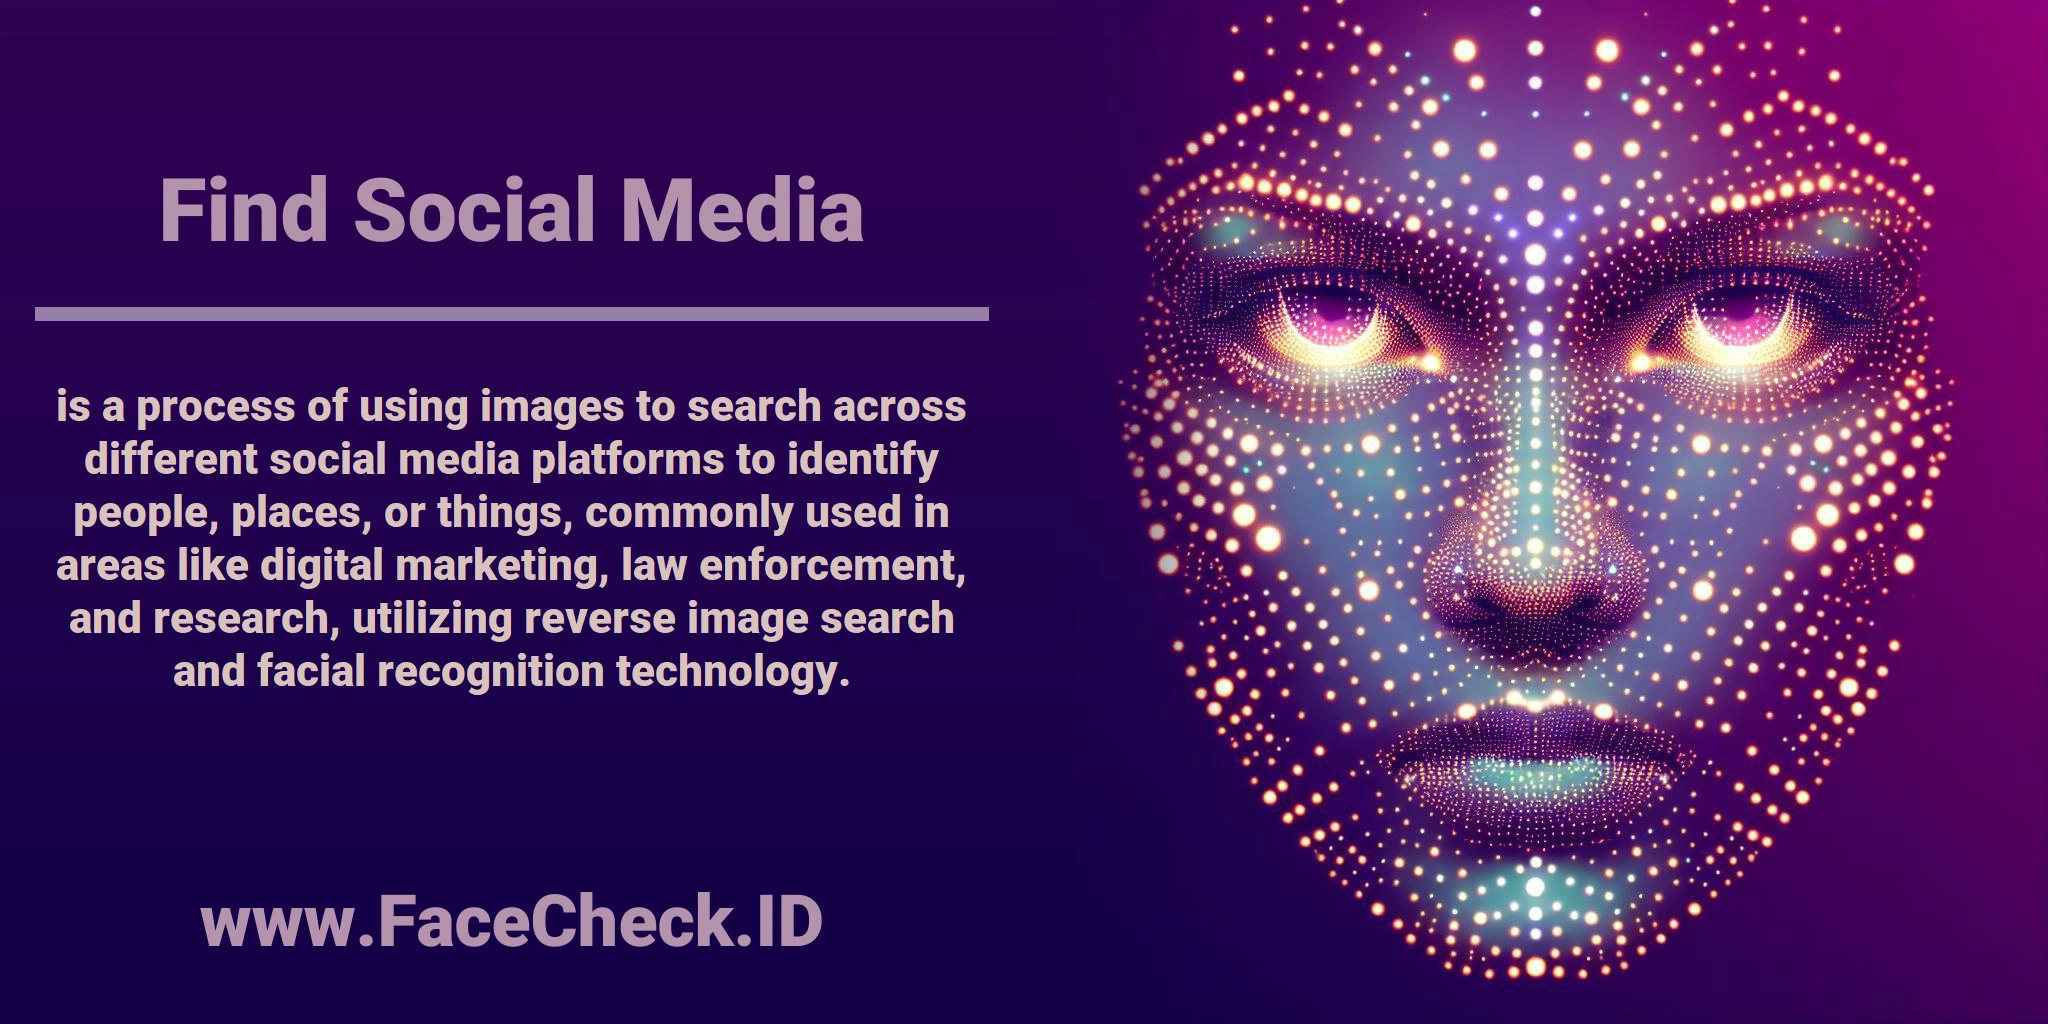 <b>Find Social Media</b> is a process of using images to search across different social media platforms to identify people, places, or things, commonly used in areas like digital marketing, law enforcement, and research, utilizing reverse image search and facial recognition technology.
